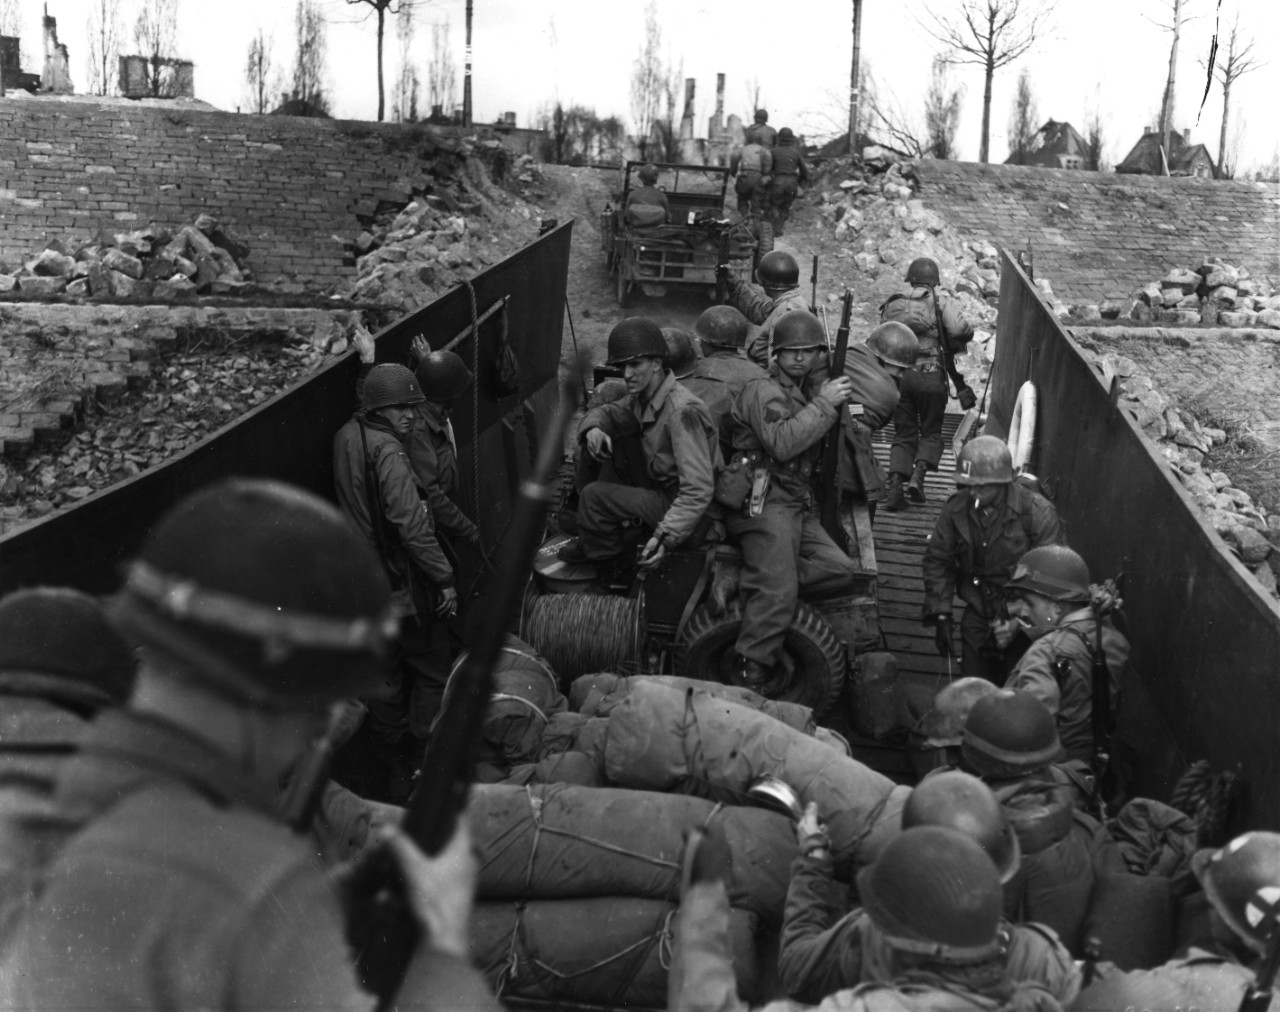 Men and vehicles of the 80th Infantry Division, Third US Army, load into a landing craft prior to crossing the Rhine River, Germany, 29 March 1945. Note M-1 Garand rifle and belt gear of man in center, including TL-29 knife, and M-1 carbines carr...